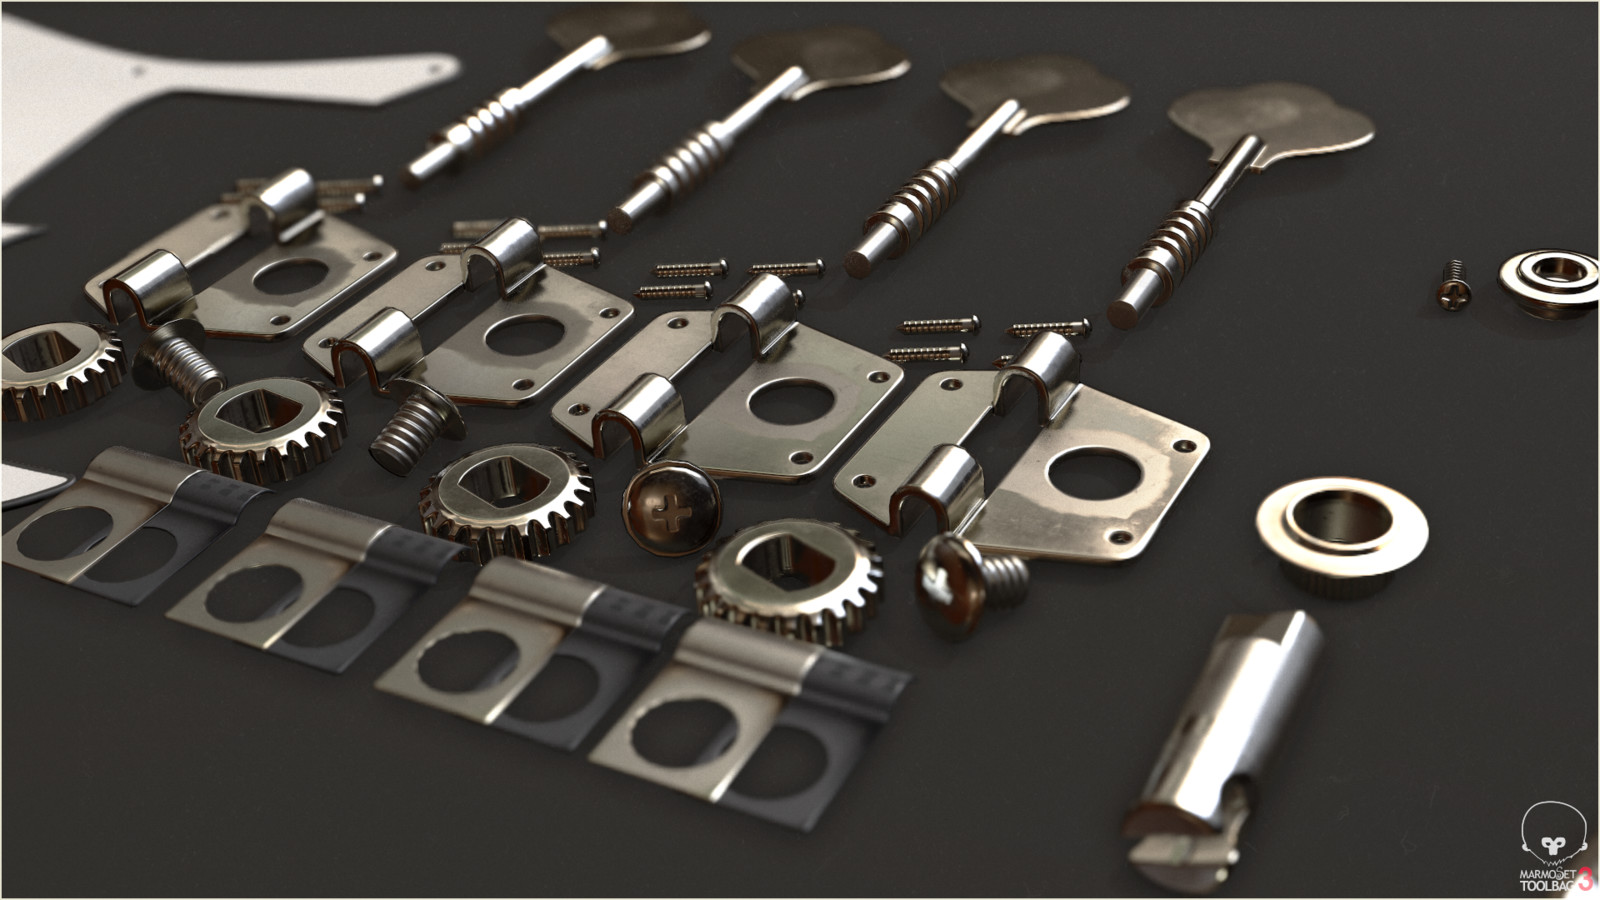 Machineheads Disassembled (Low Poly)